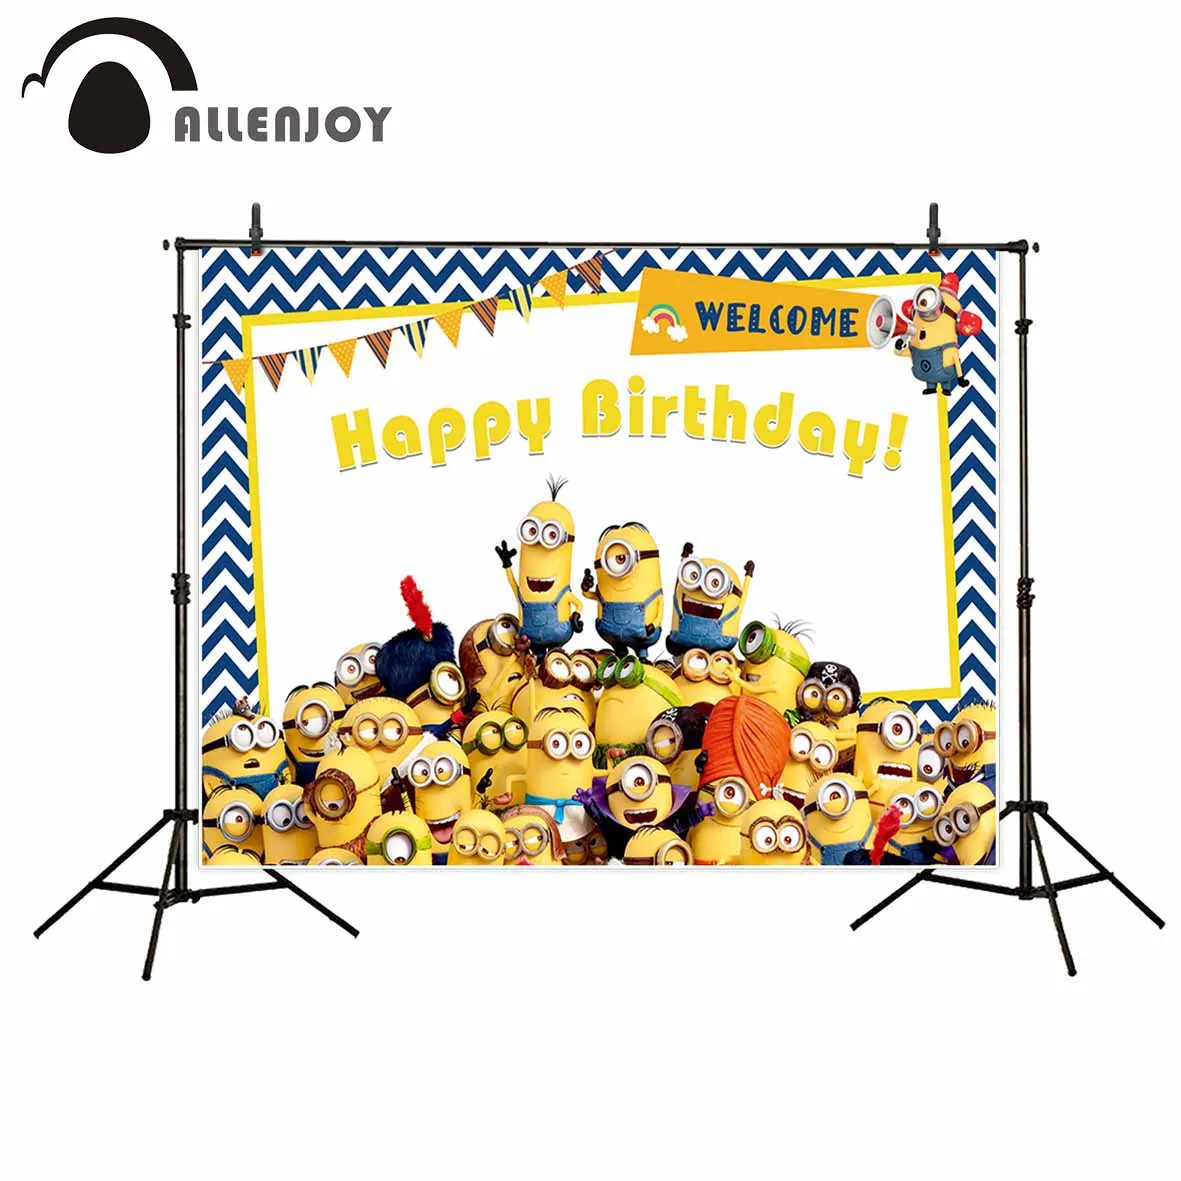 Allenjoy photographic background Stripes Yellow Party Birthday Party backdrop photocall professional customize exclude stand